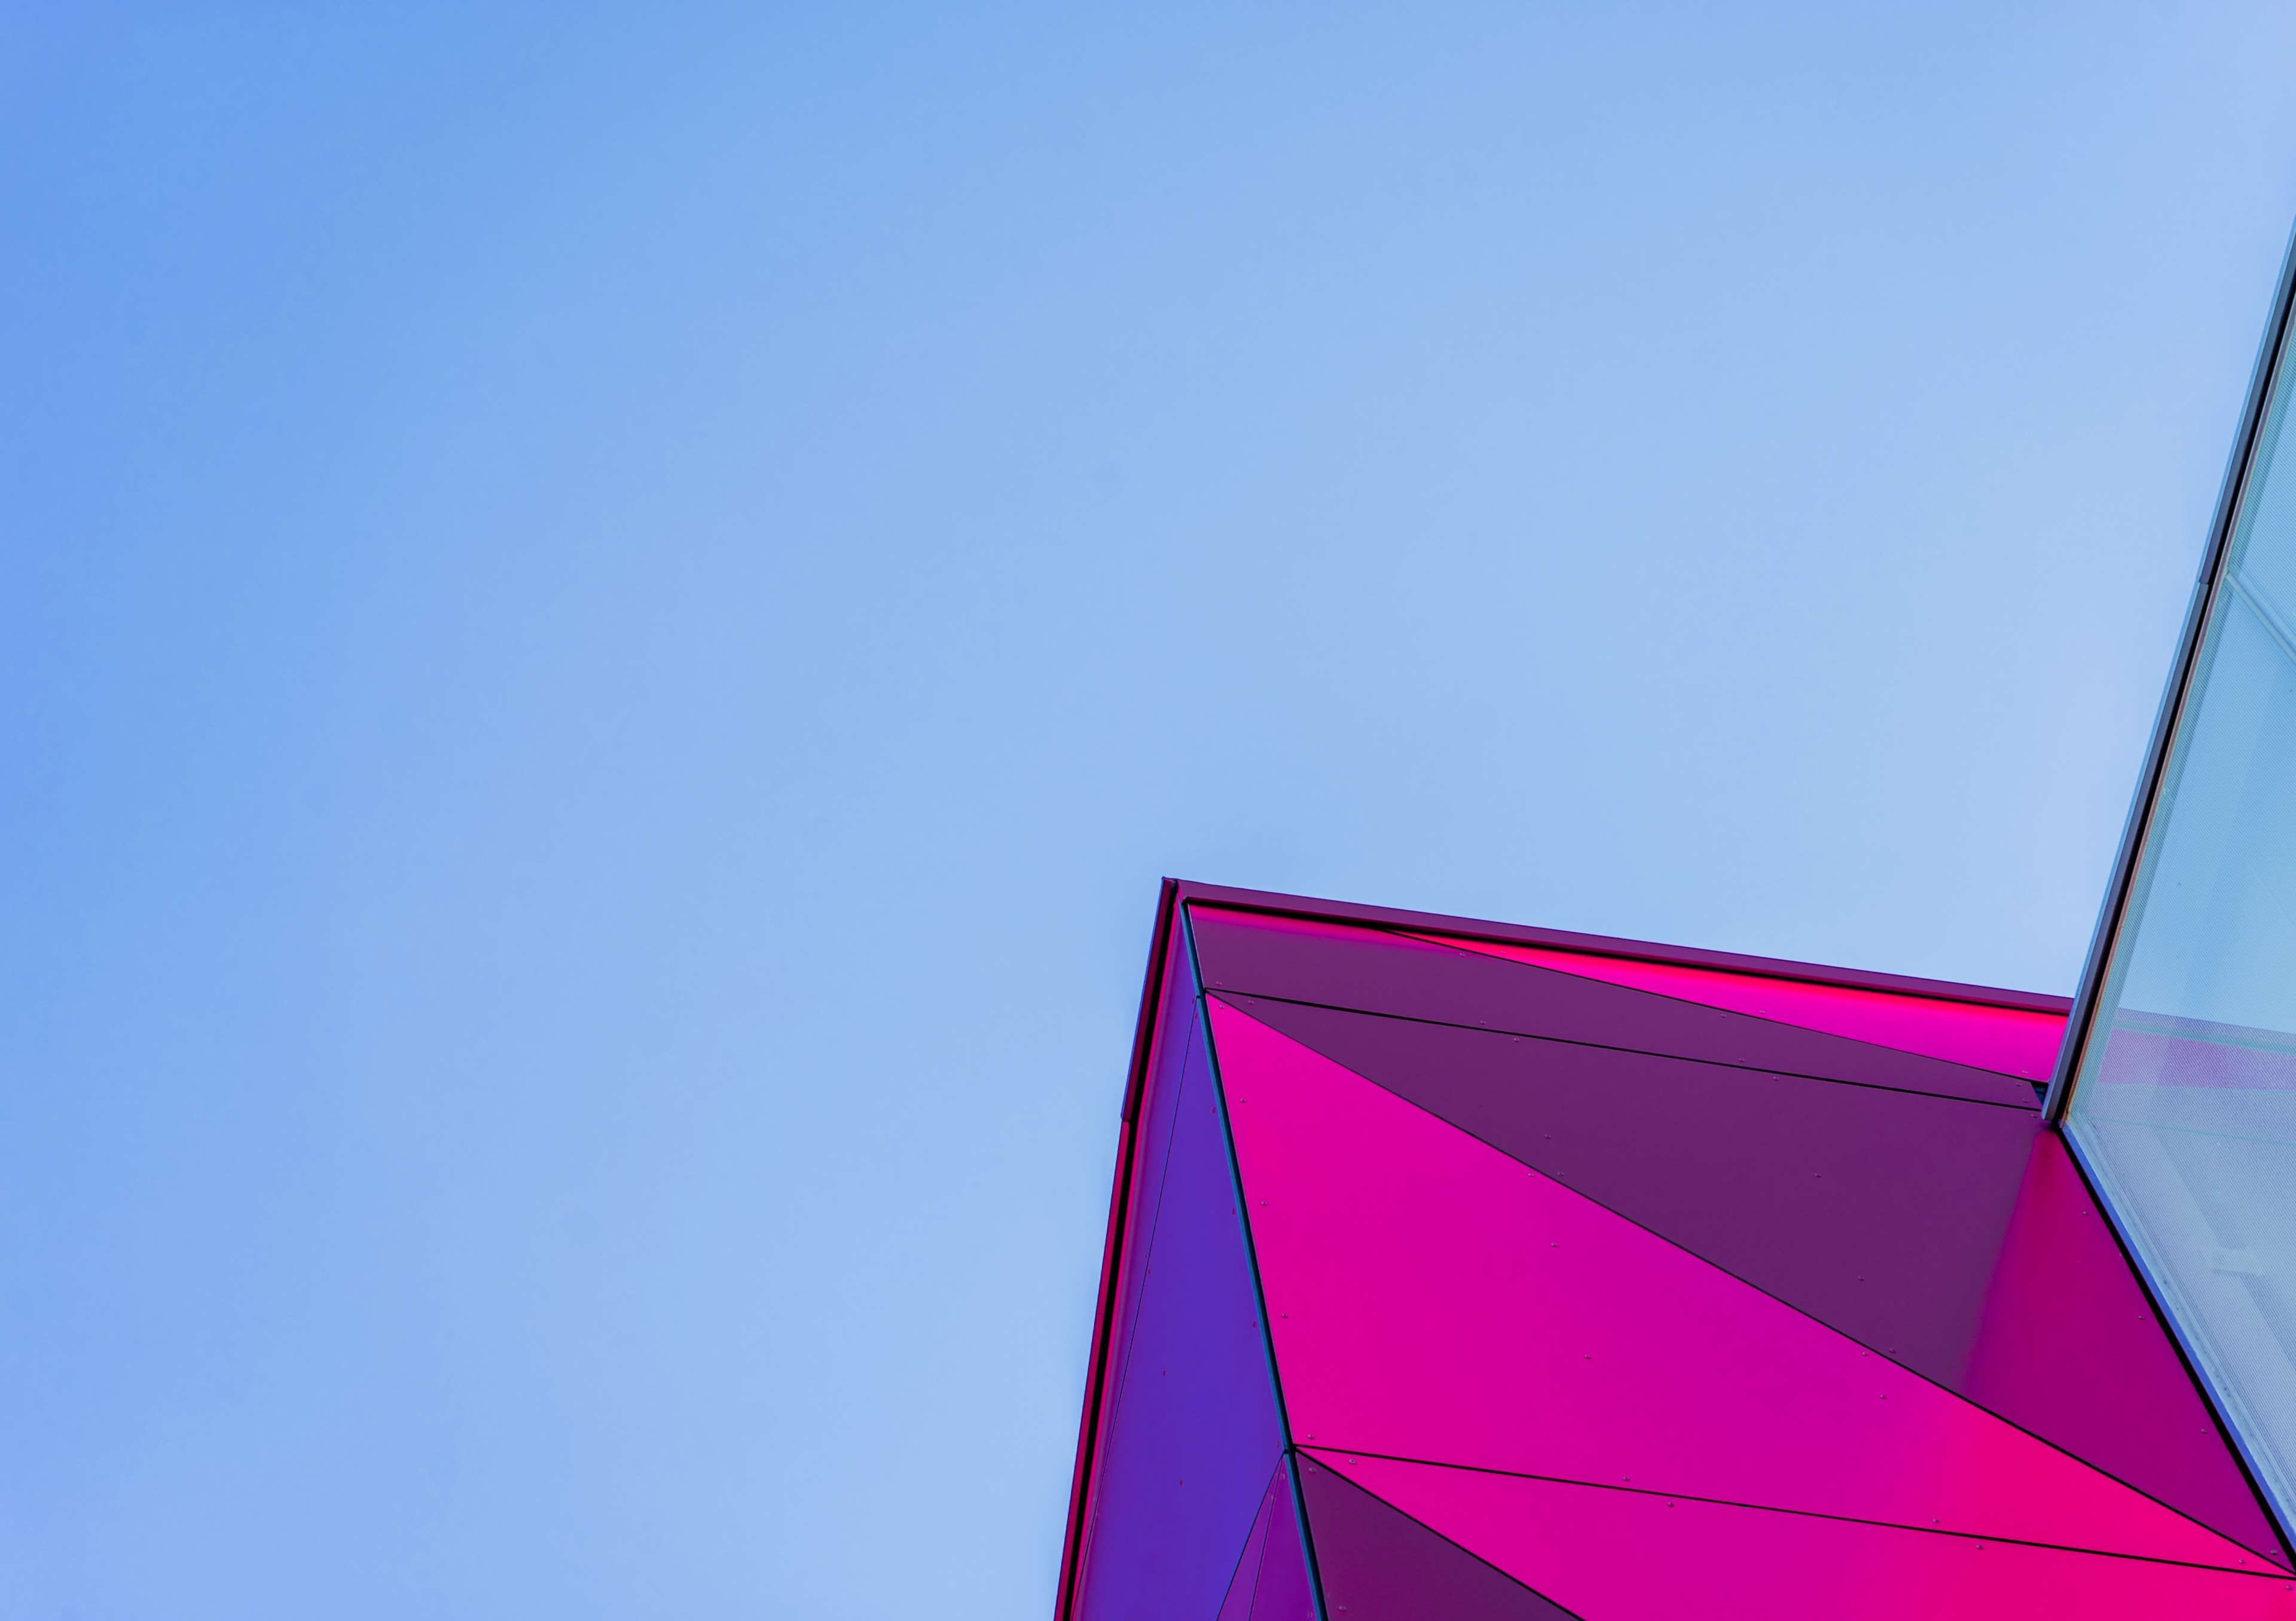 abstract, architectural, architecture, art, blue sky, bright, building, city, color, contemporary, design, futuristic, geometric, glass, lines, pattern, pink, red, shape, urban 4k wallpaper. Mocah.org HD Wallpaper